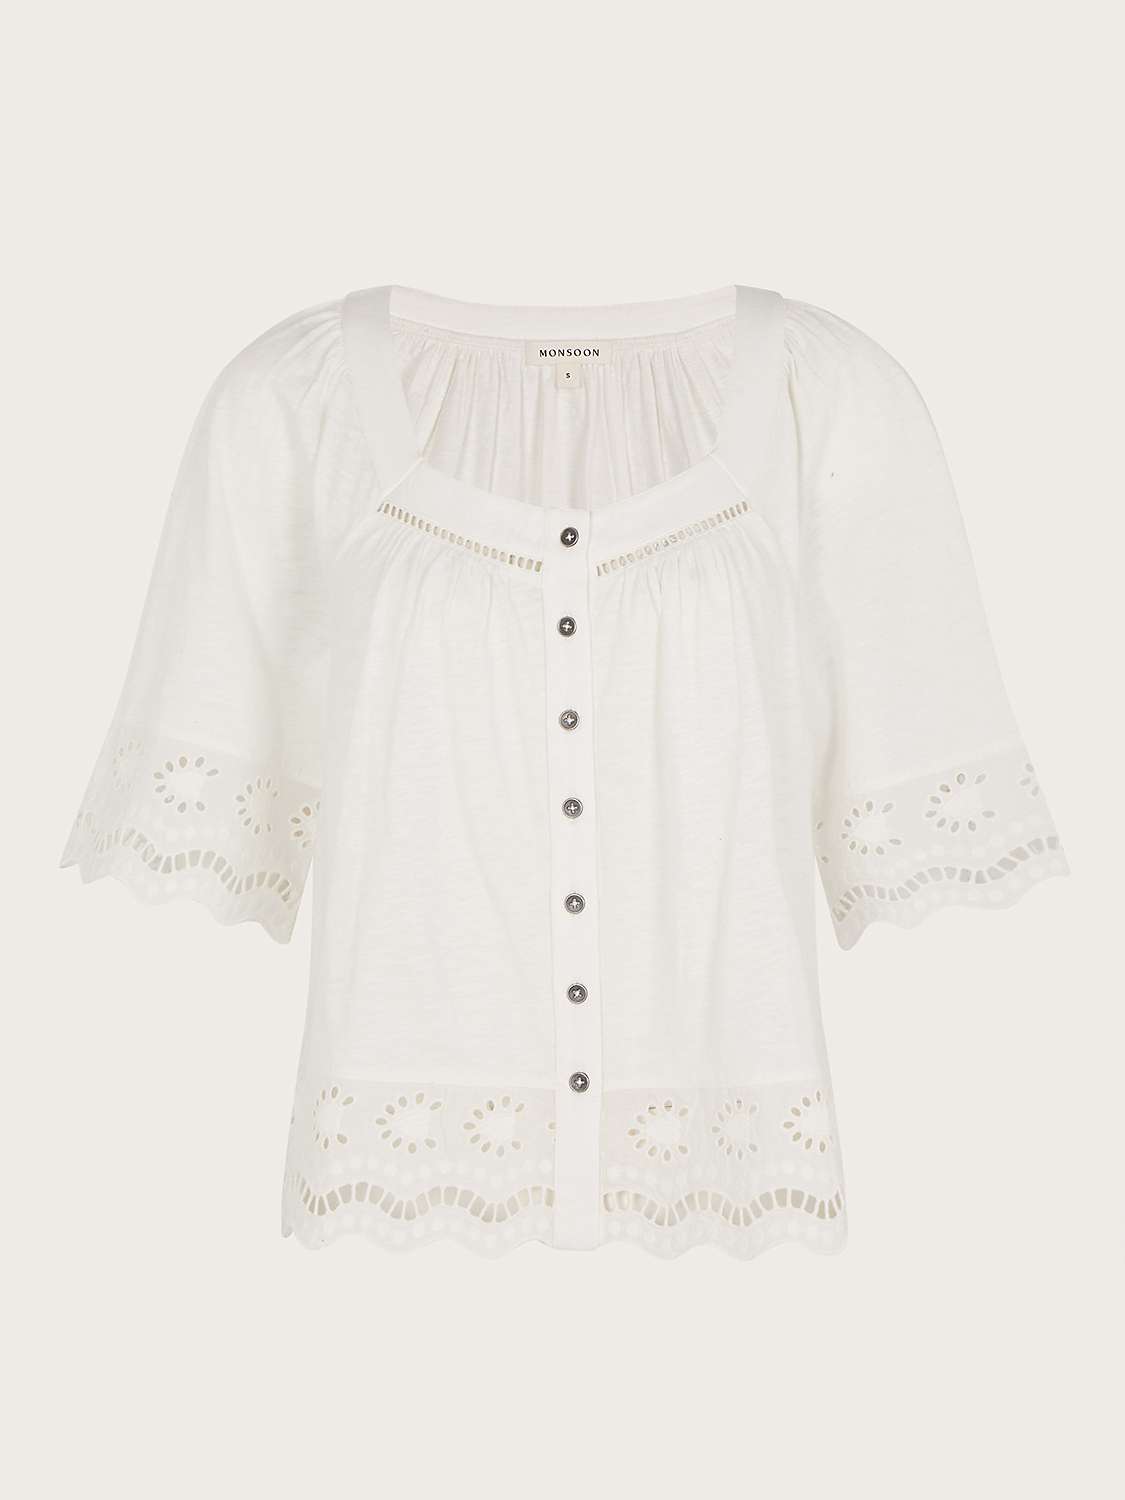 Monsoon Broderie Trim Cotton Blouse, Ivory at John Lewis & Partners